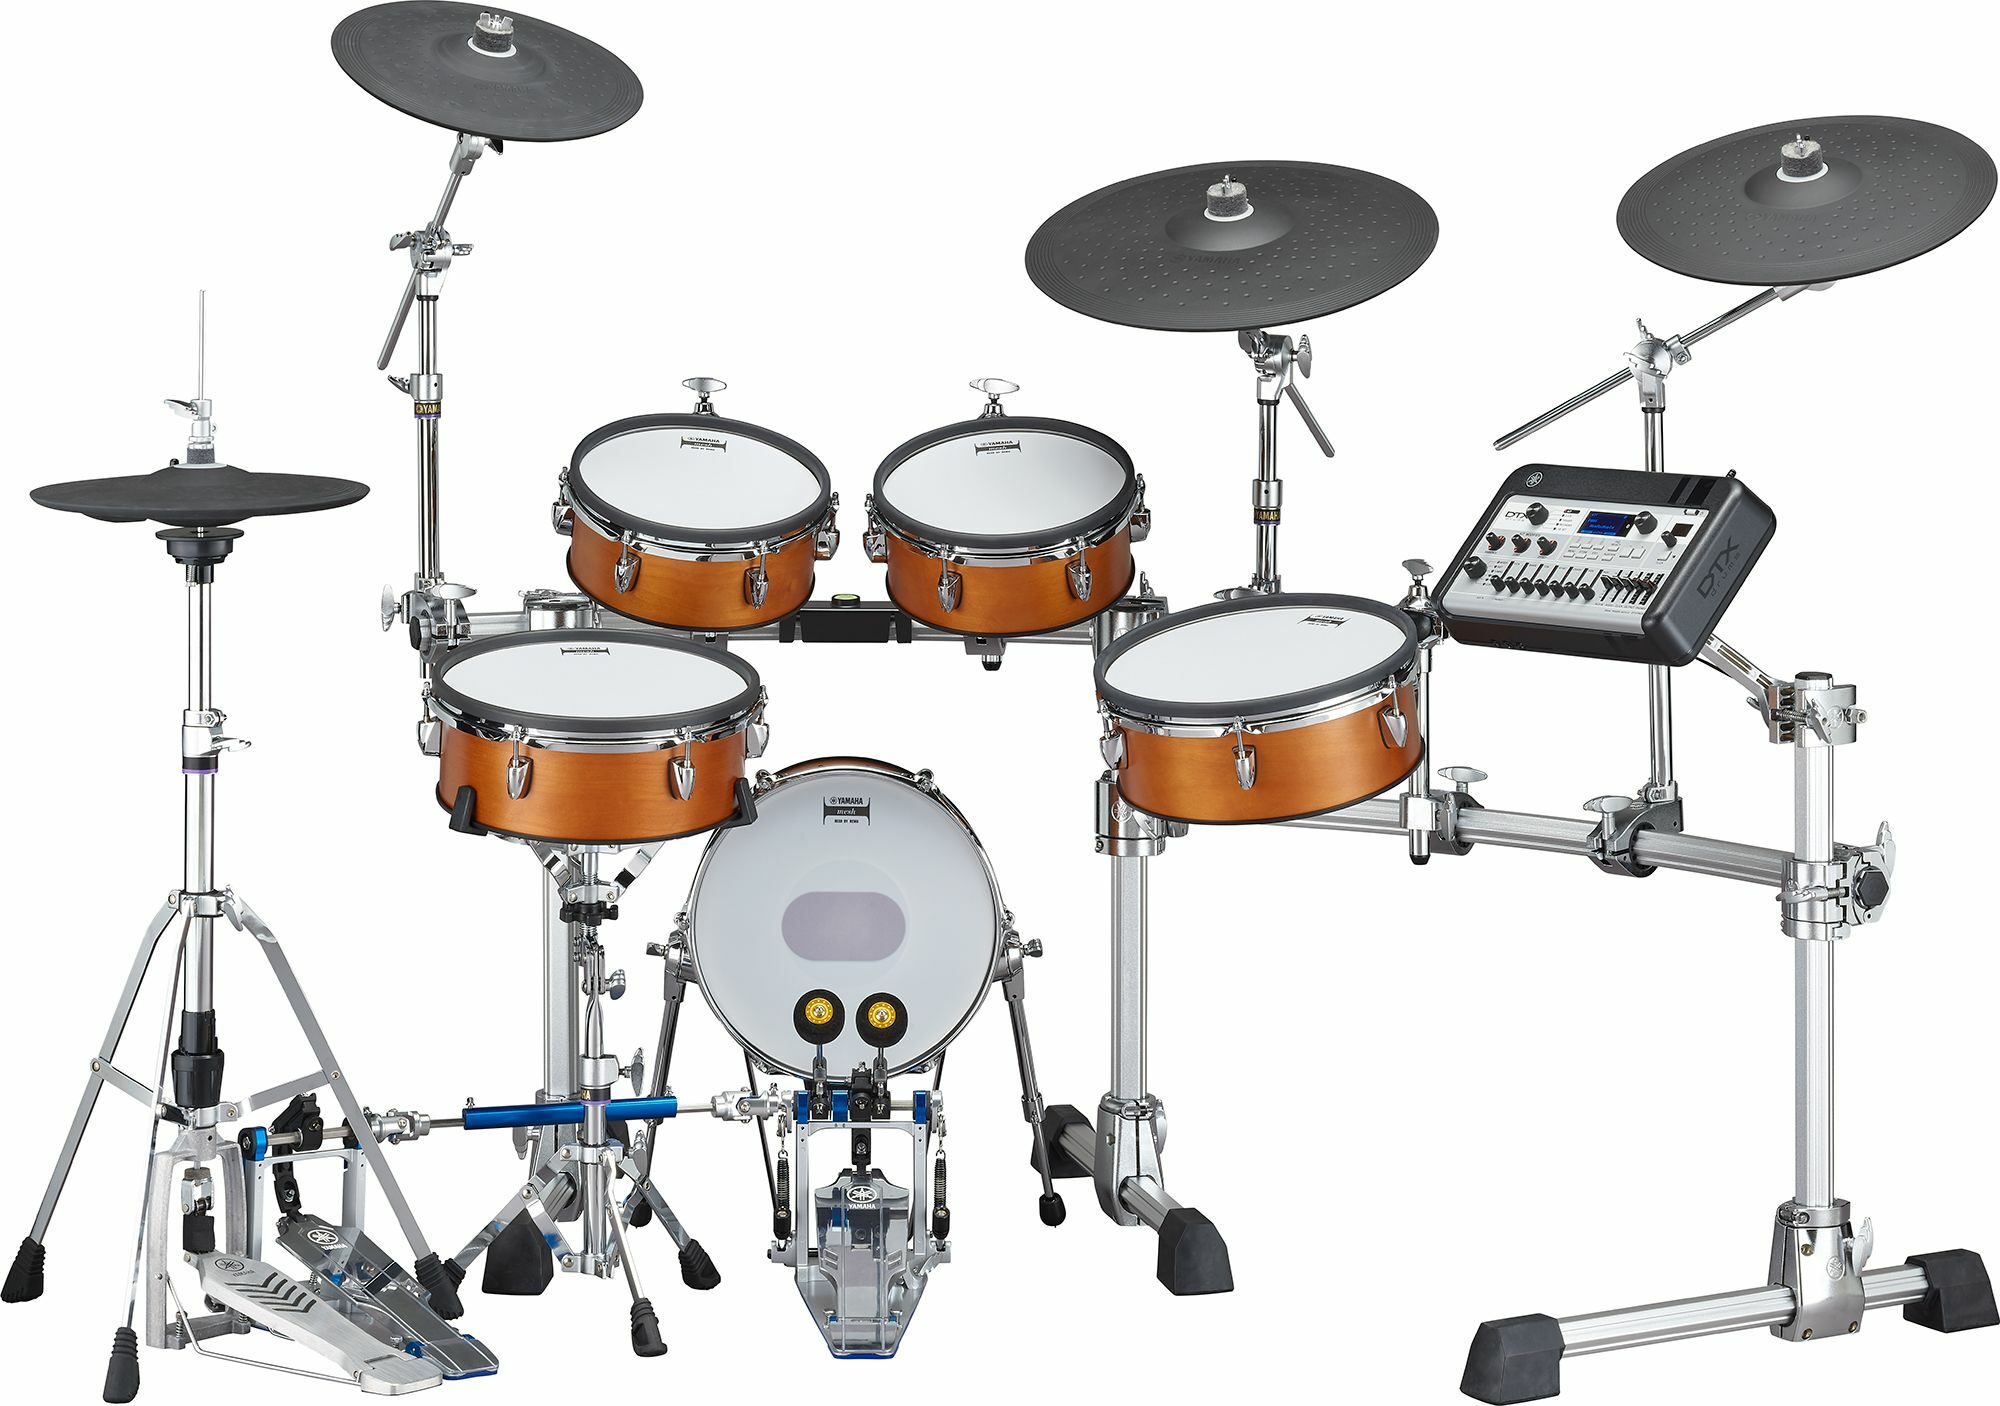 Yamaha Dtx10-km Electronic Drum Kit Mesh Black Forrest - Batería electrónica completa - Main picture